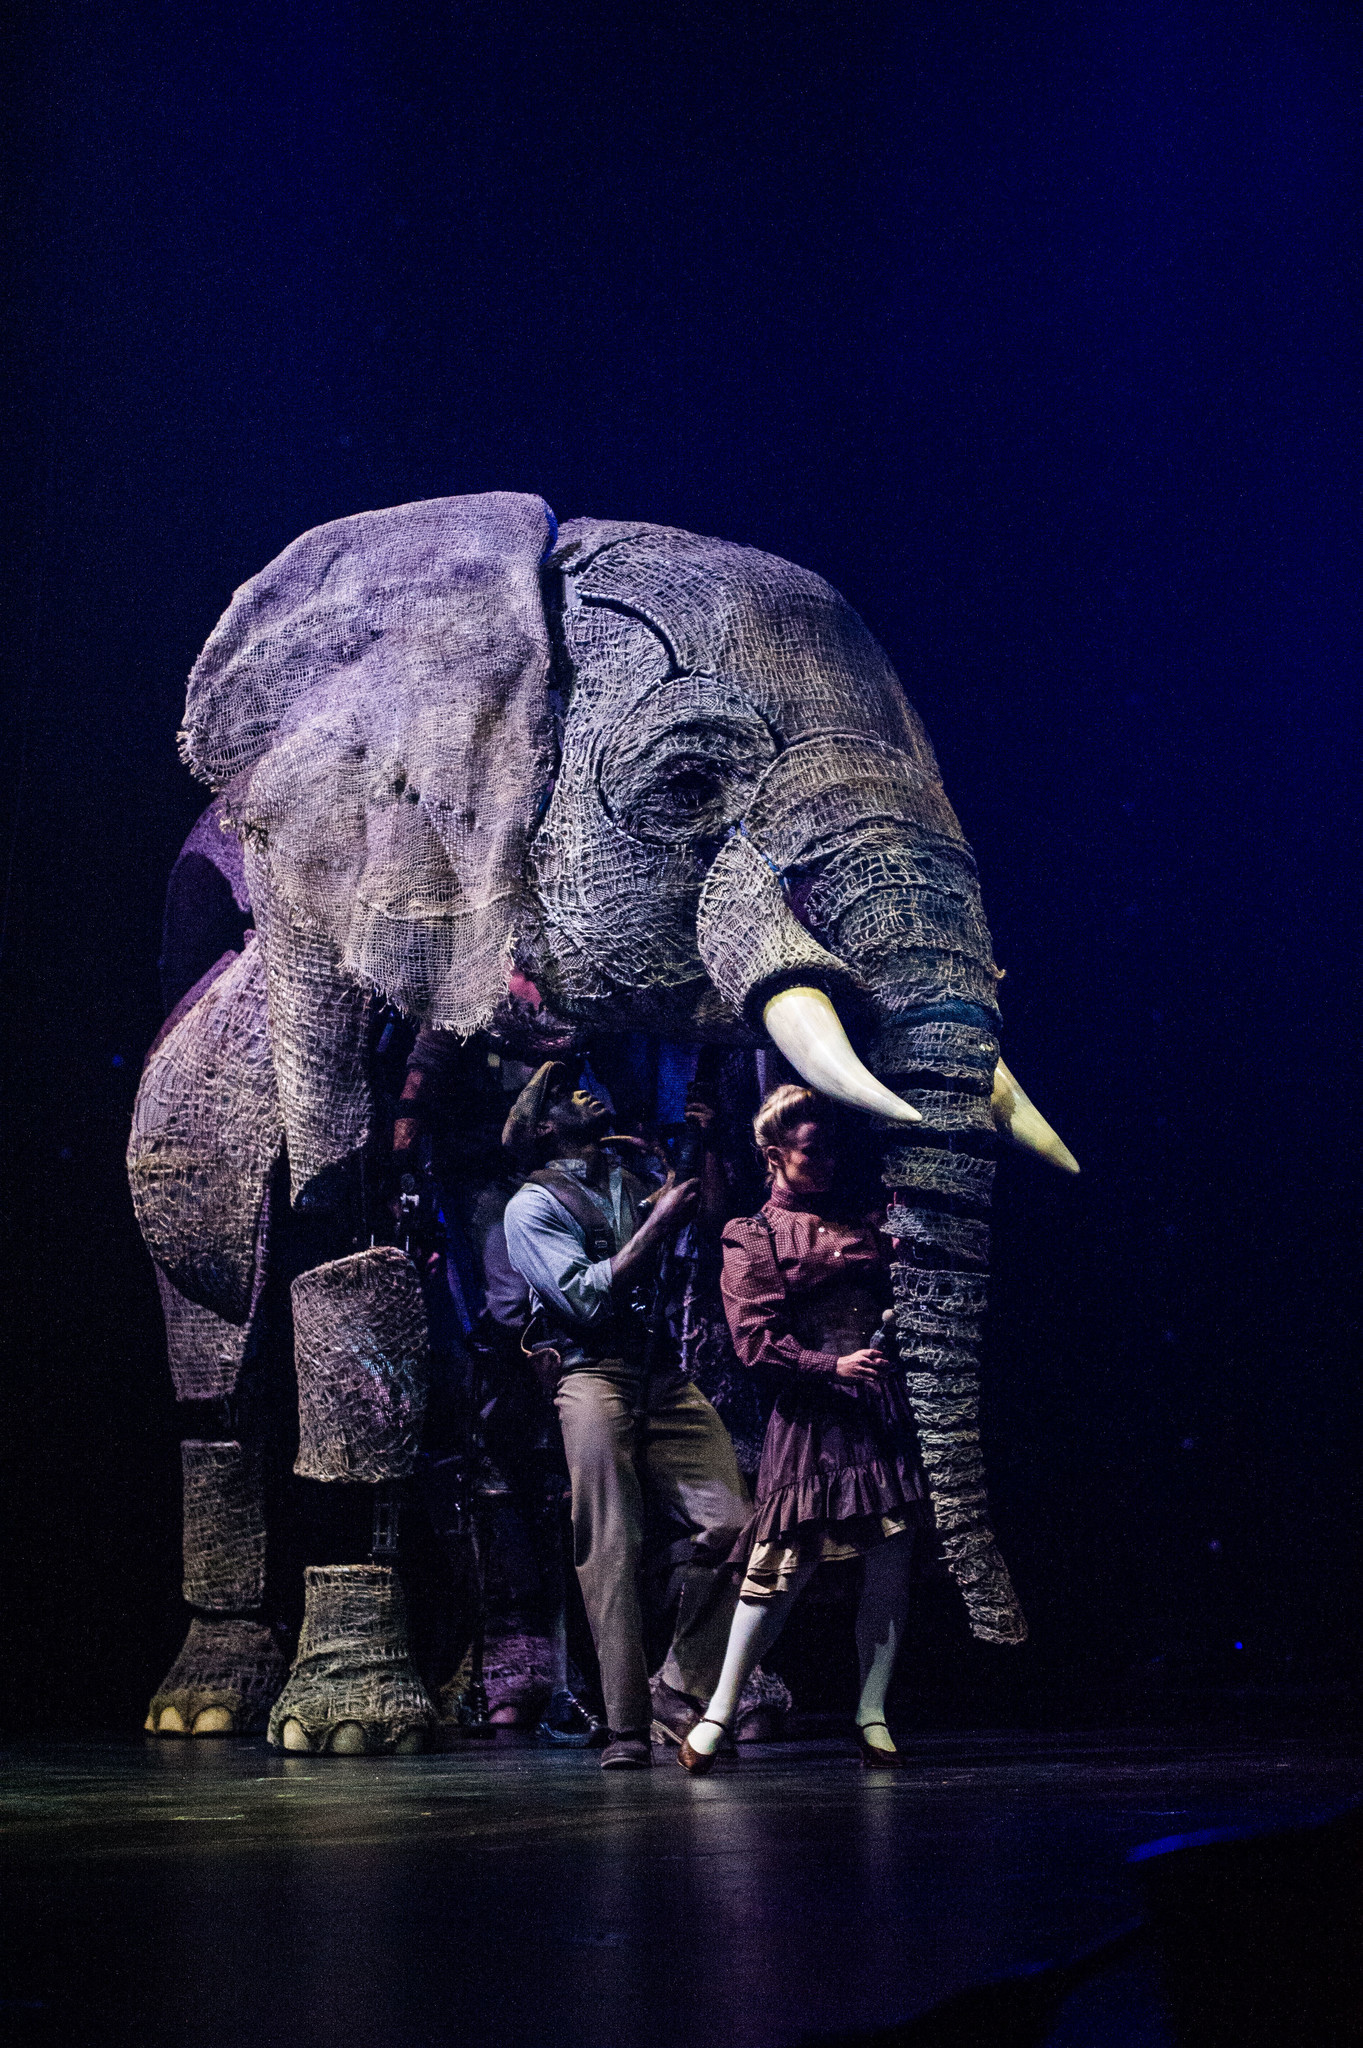 The creative team behind the "War Horse" puppetry designed the lifelike elephants in "Circus 1903."